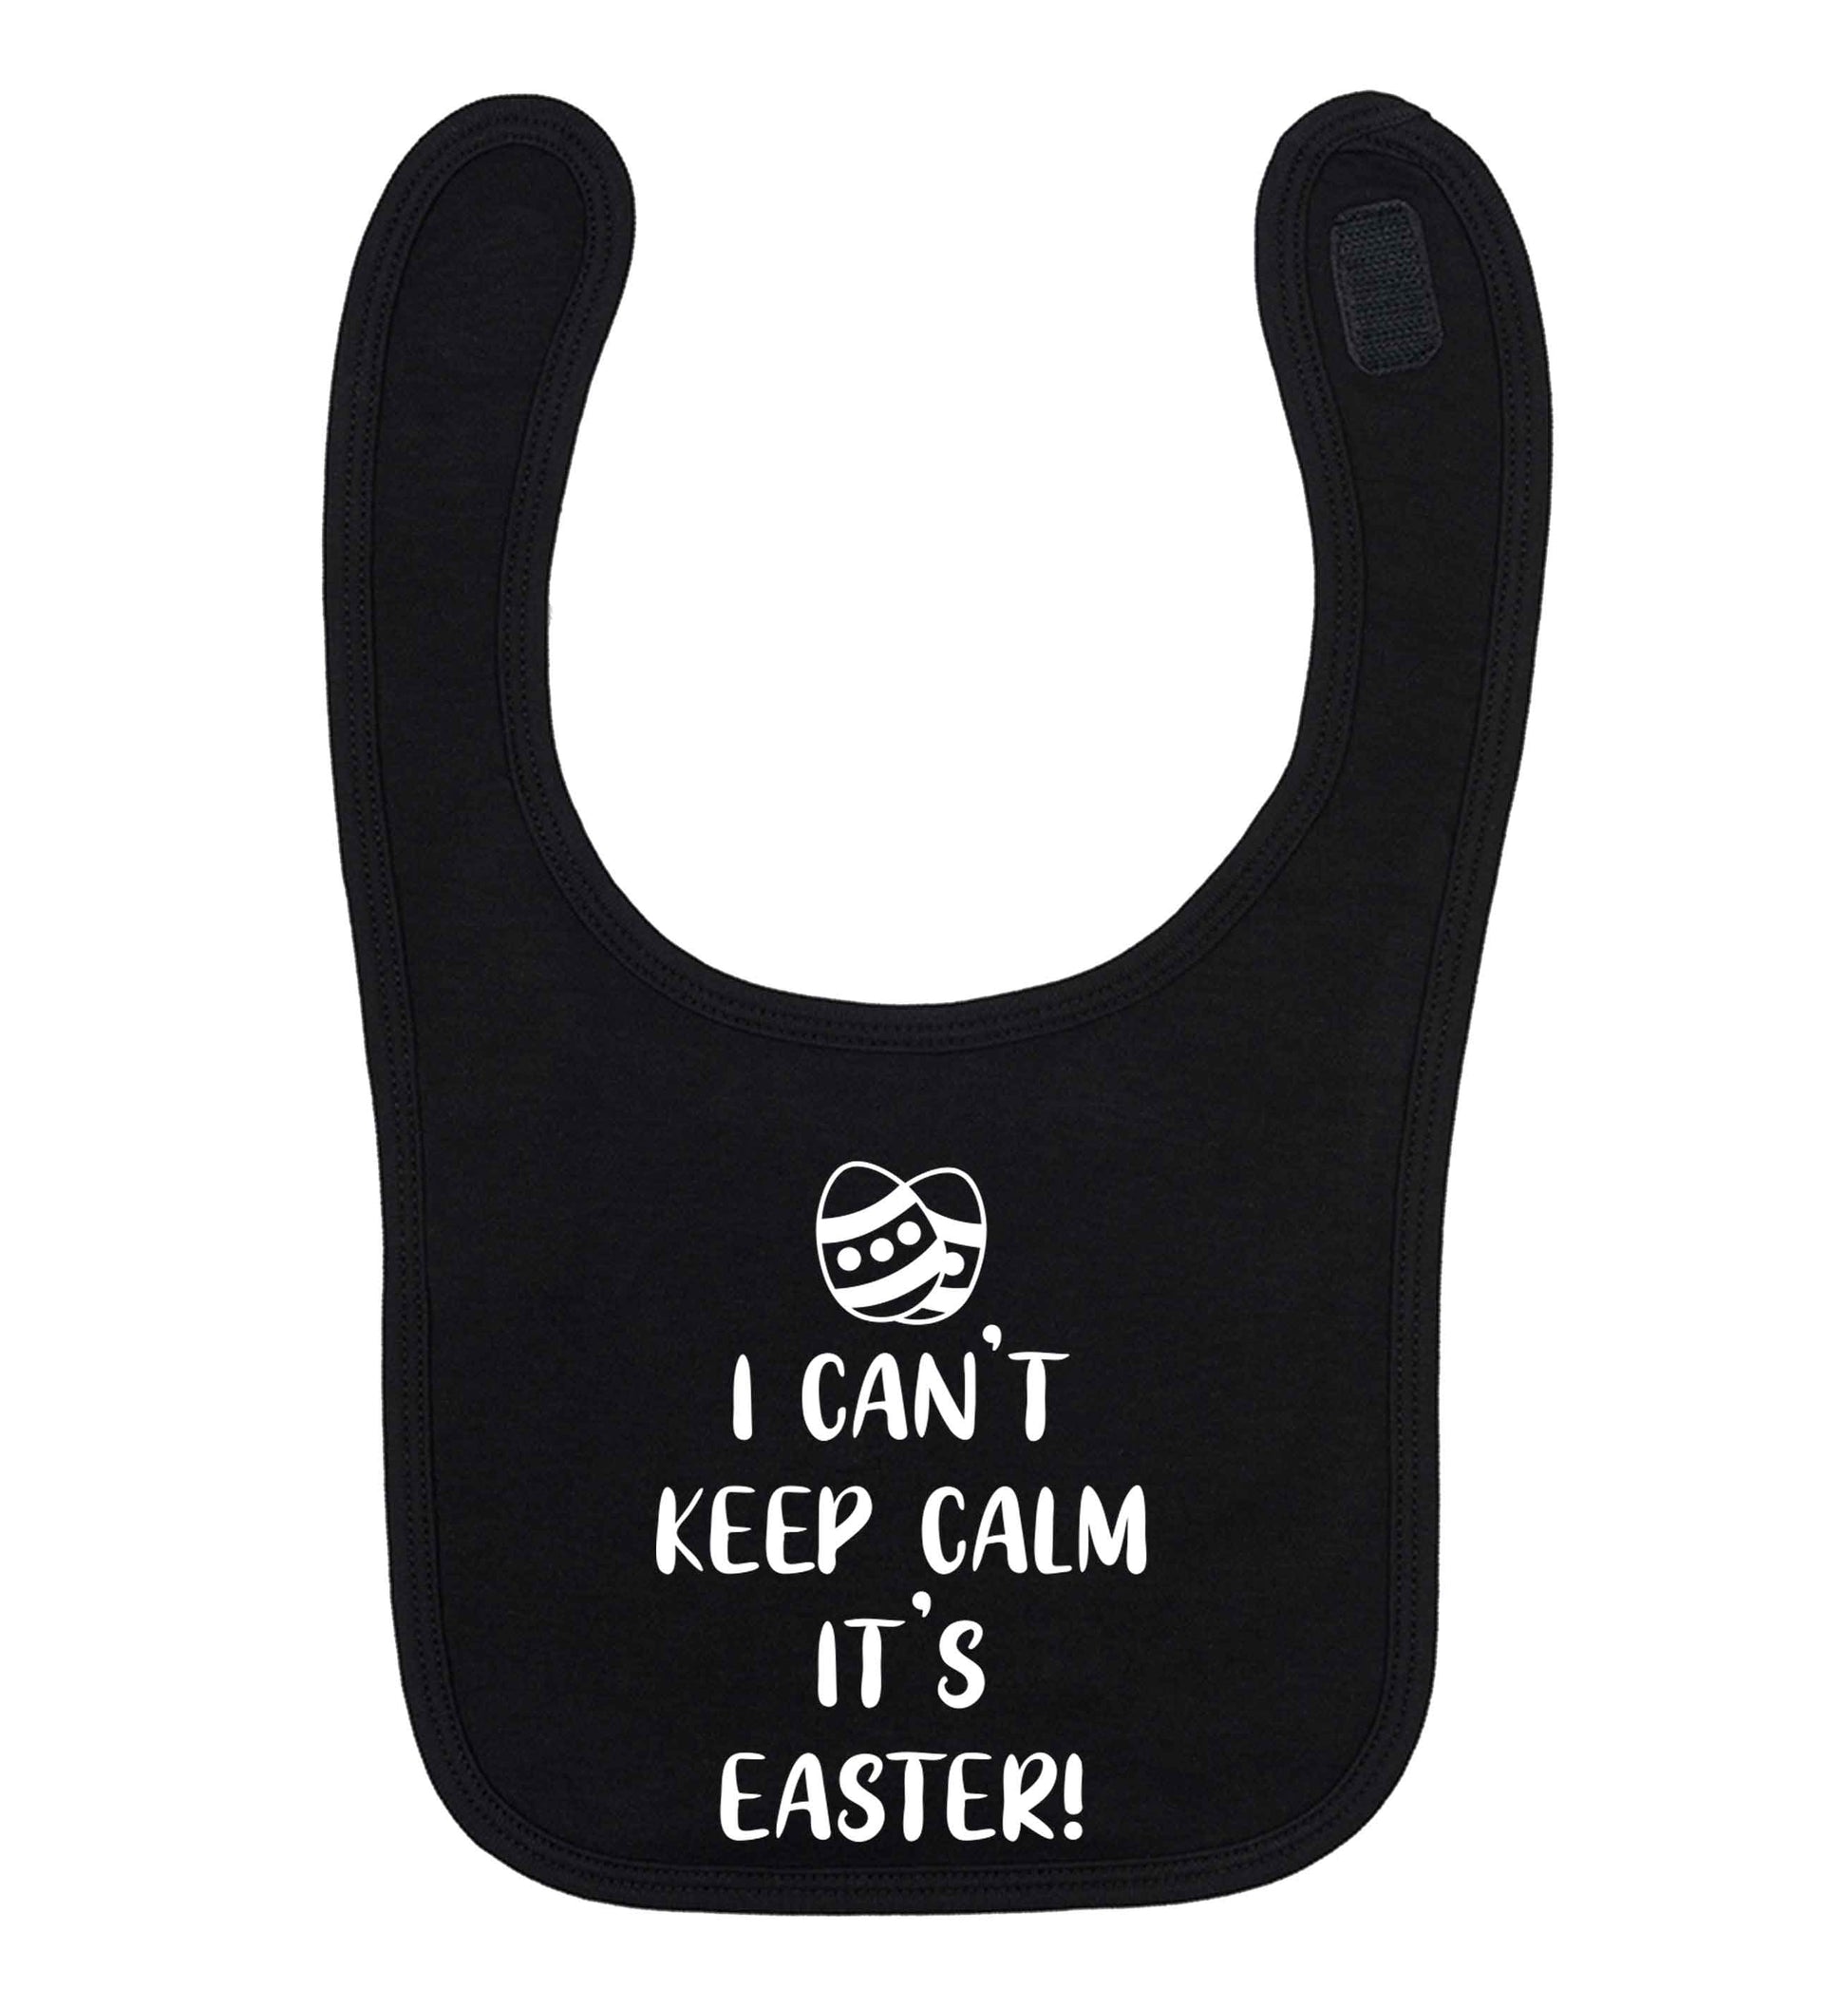 I can't keep calm it's Easter black baby bib